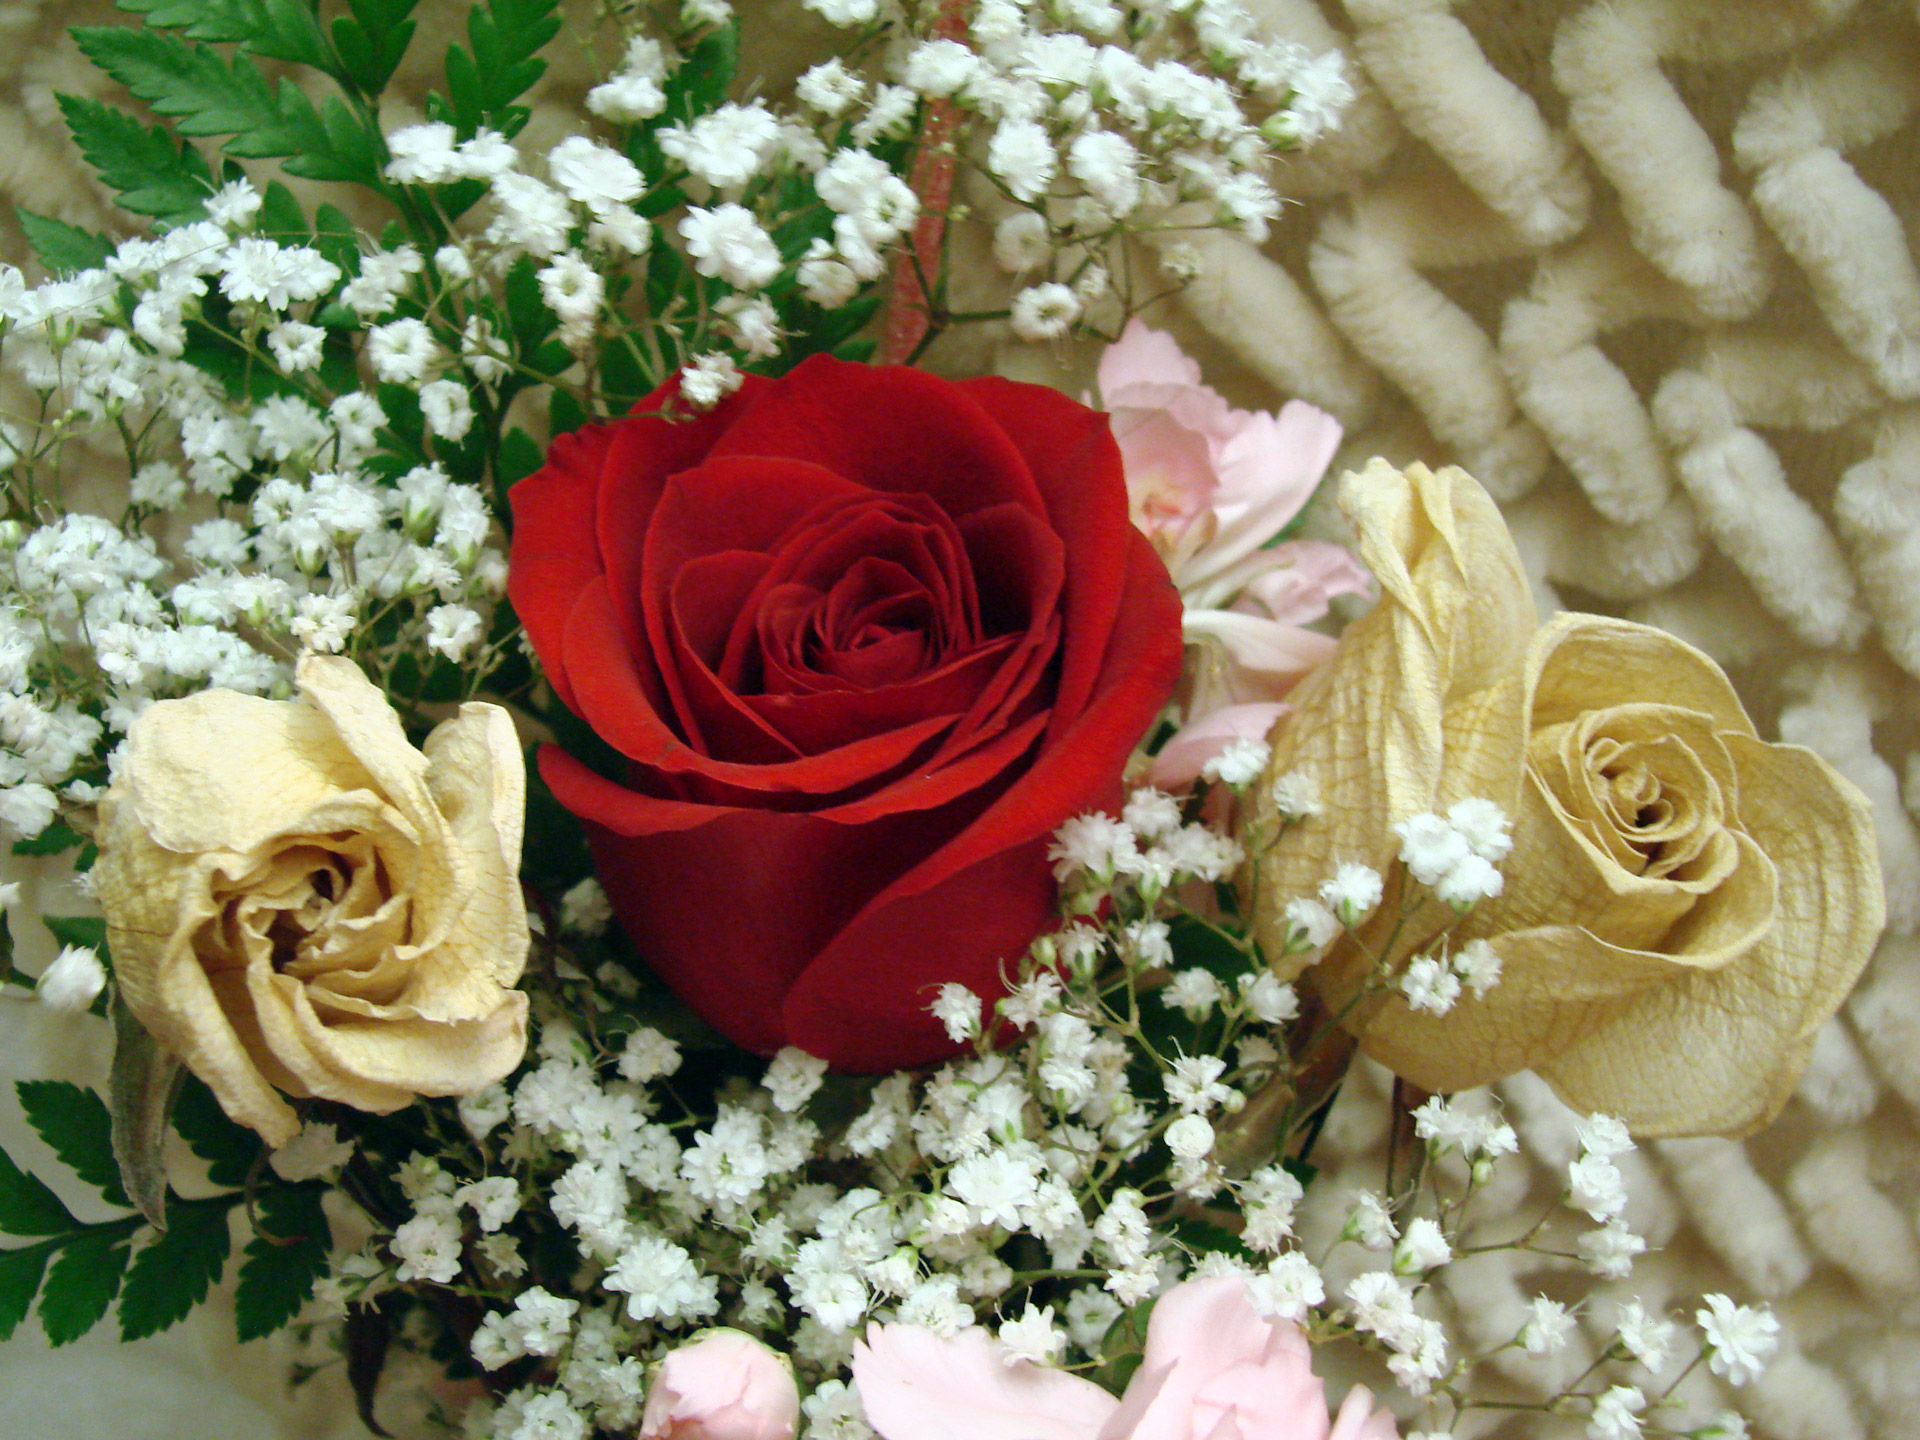 A fresh red rose and two dried white roses in arrangement.